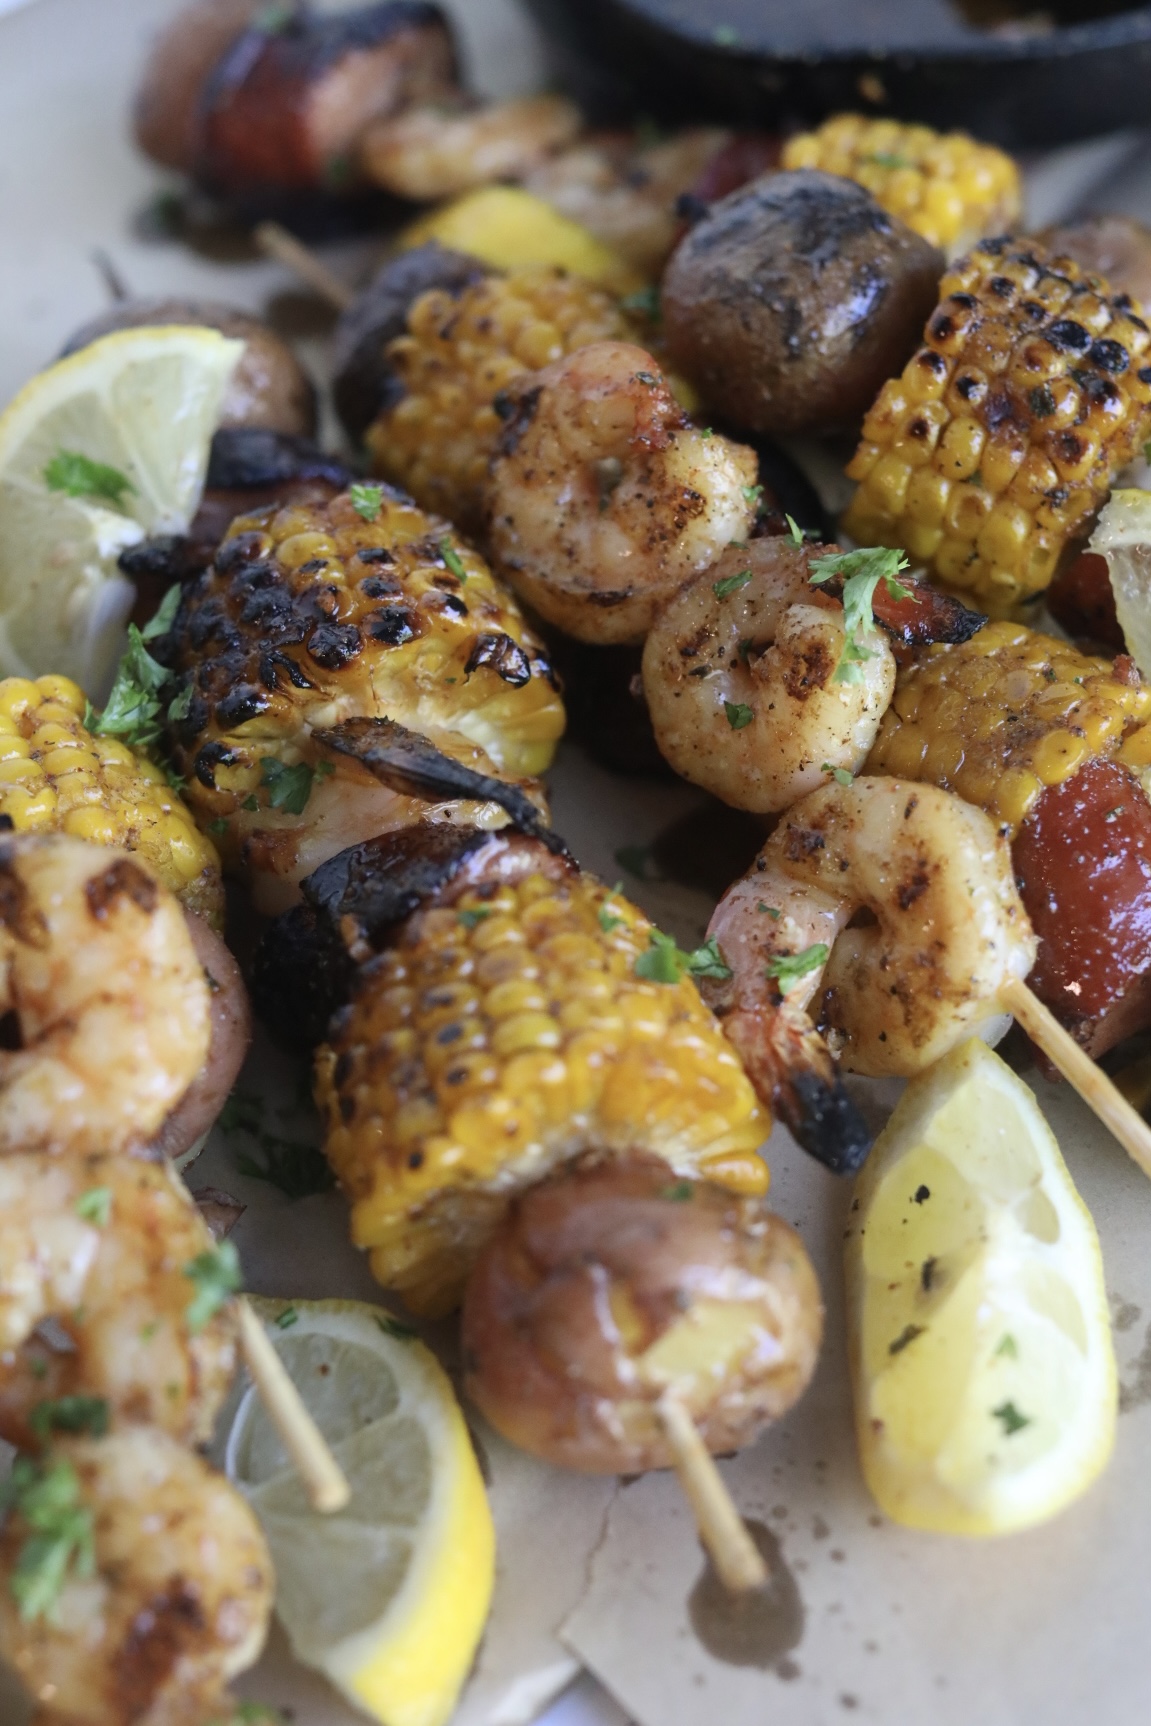 Final recipe images of grilled shrimp kabobs. Kabobs have charred finishes and garnished with fresh lemon slices and parsley.